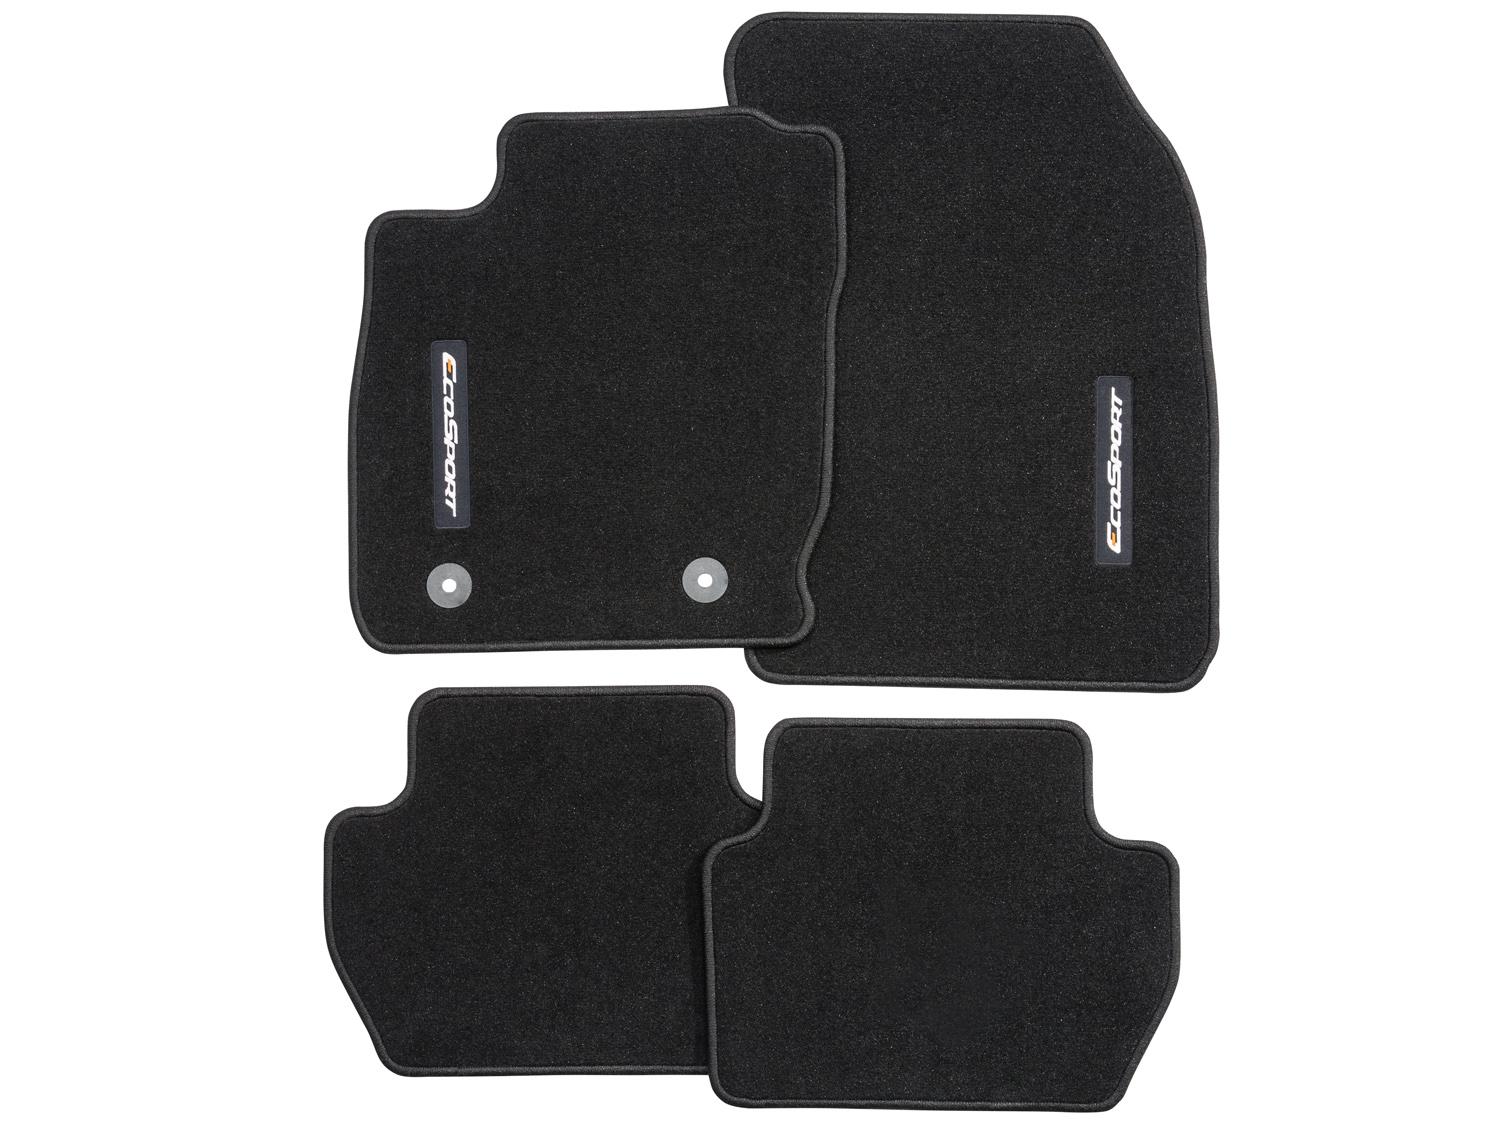 Image for Floor Mats - Carpeted, 4 Piece Set, Black from AccessoriesCanada